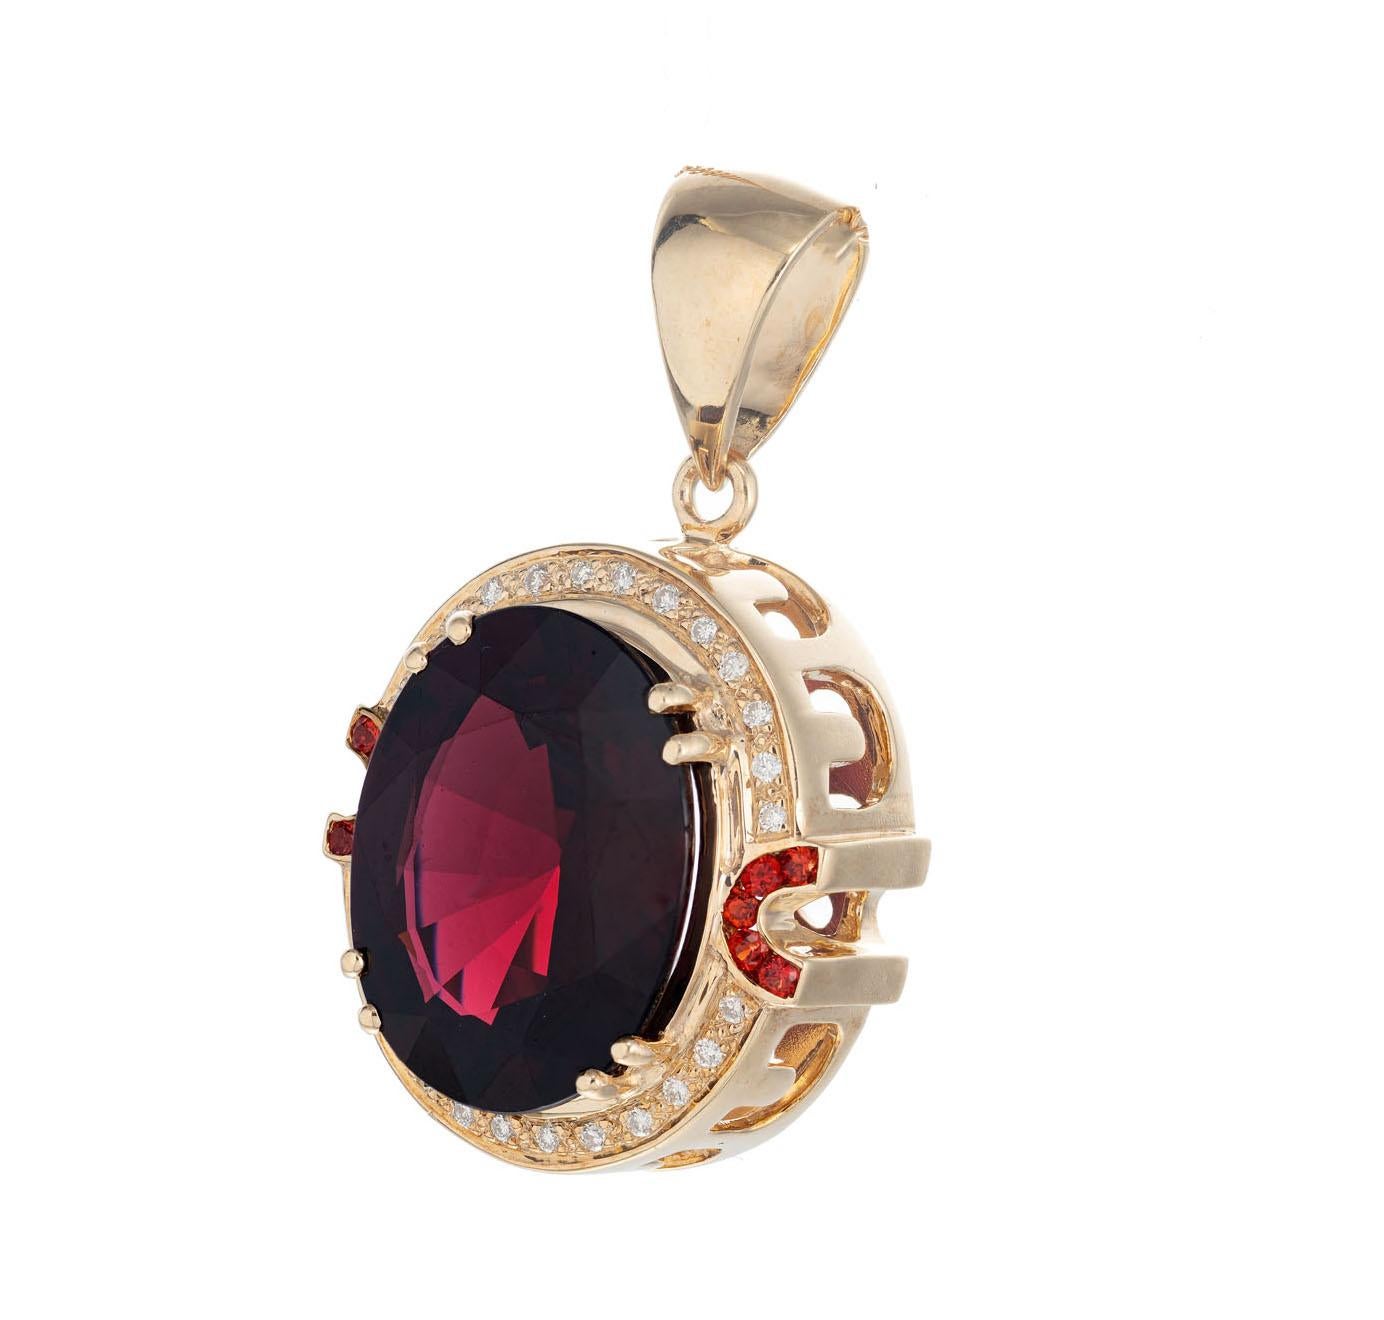 15.00ct garnet pendant with a halo of full cut diamonds and round red Rubies. Pierced side gallery and bottom gallery. Chain not included. 

1 oval 18.6 x 14.4mm deep red Garnet, approx. total weight 15.00cts
26 round diamonds, approx. total weight